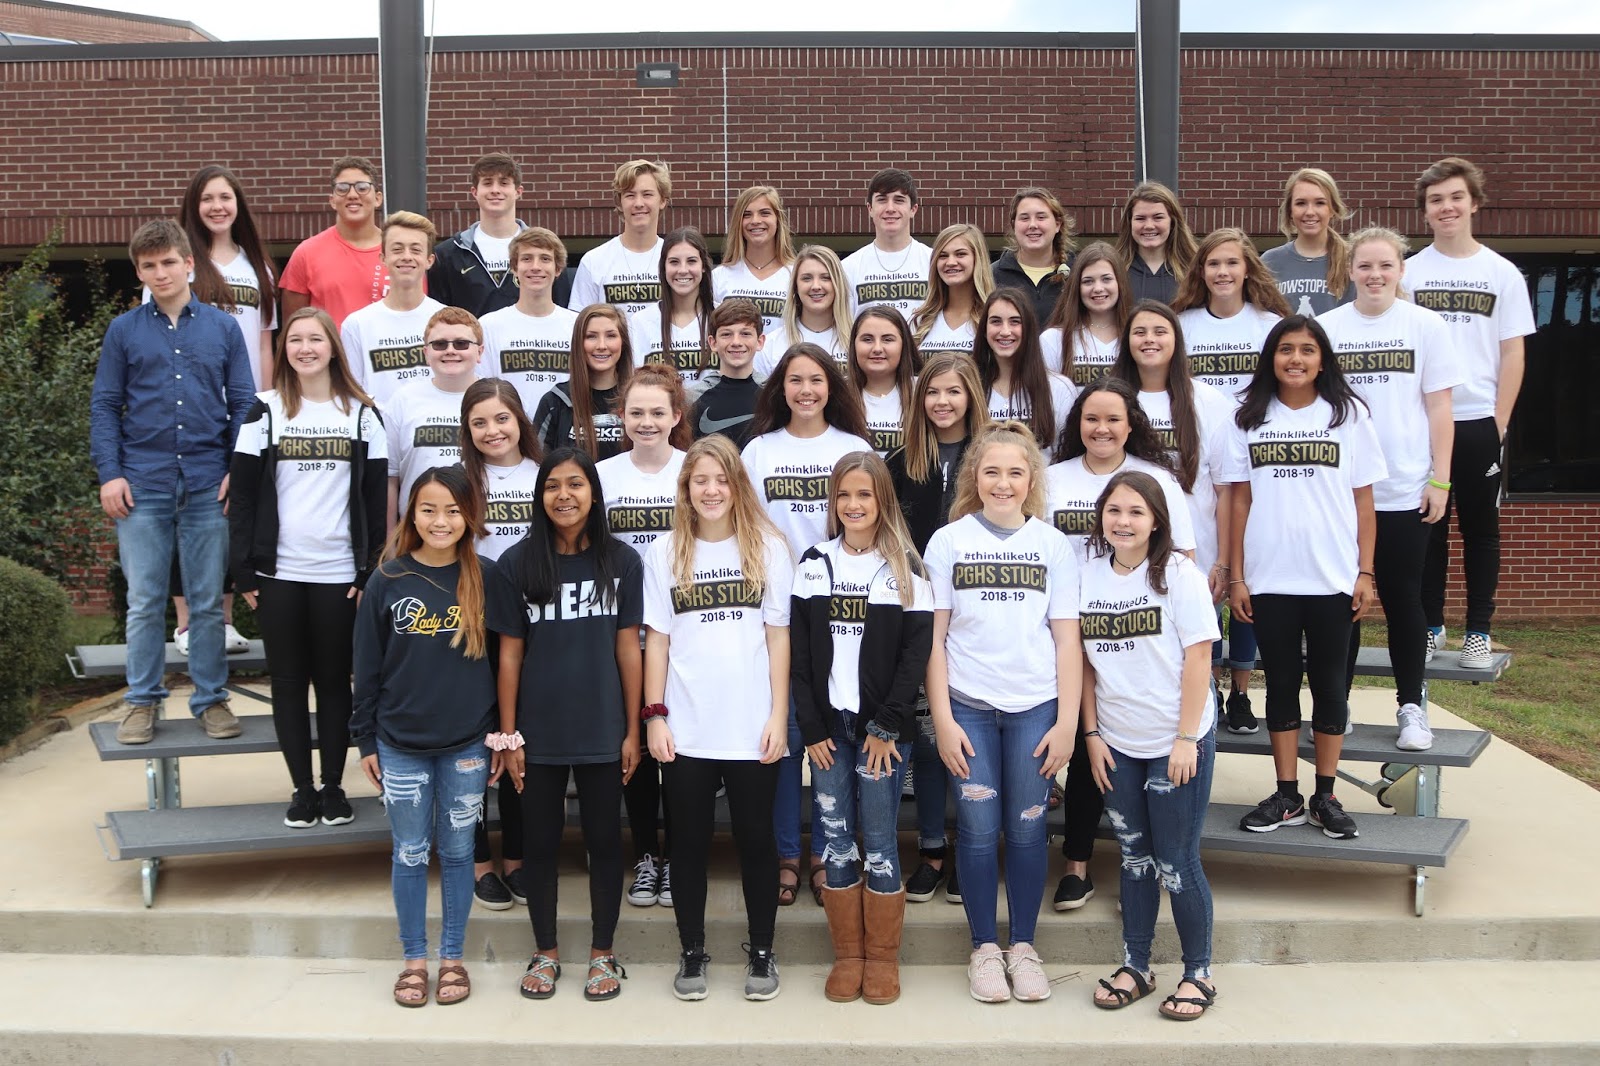 student-council-of-pleasant-grove-high-school-wins-major-state-awards